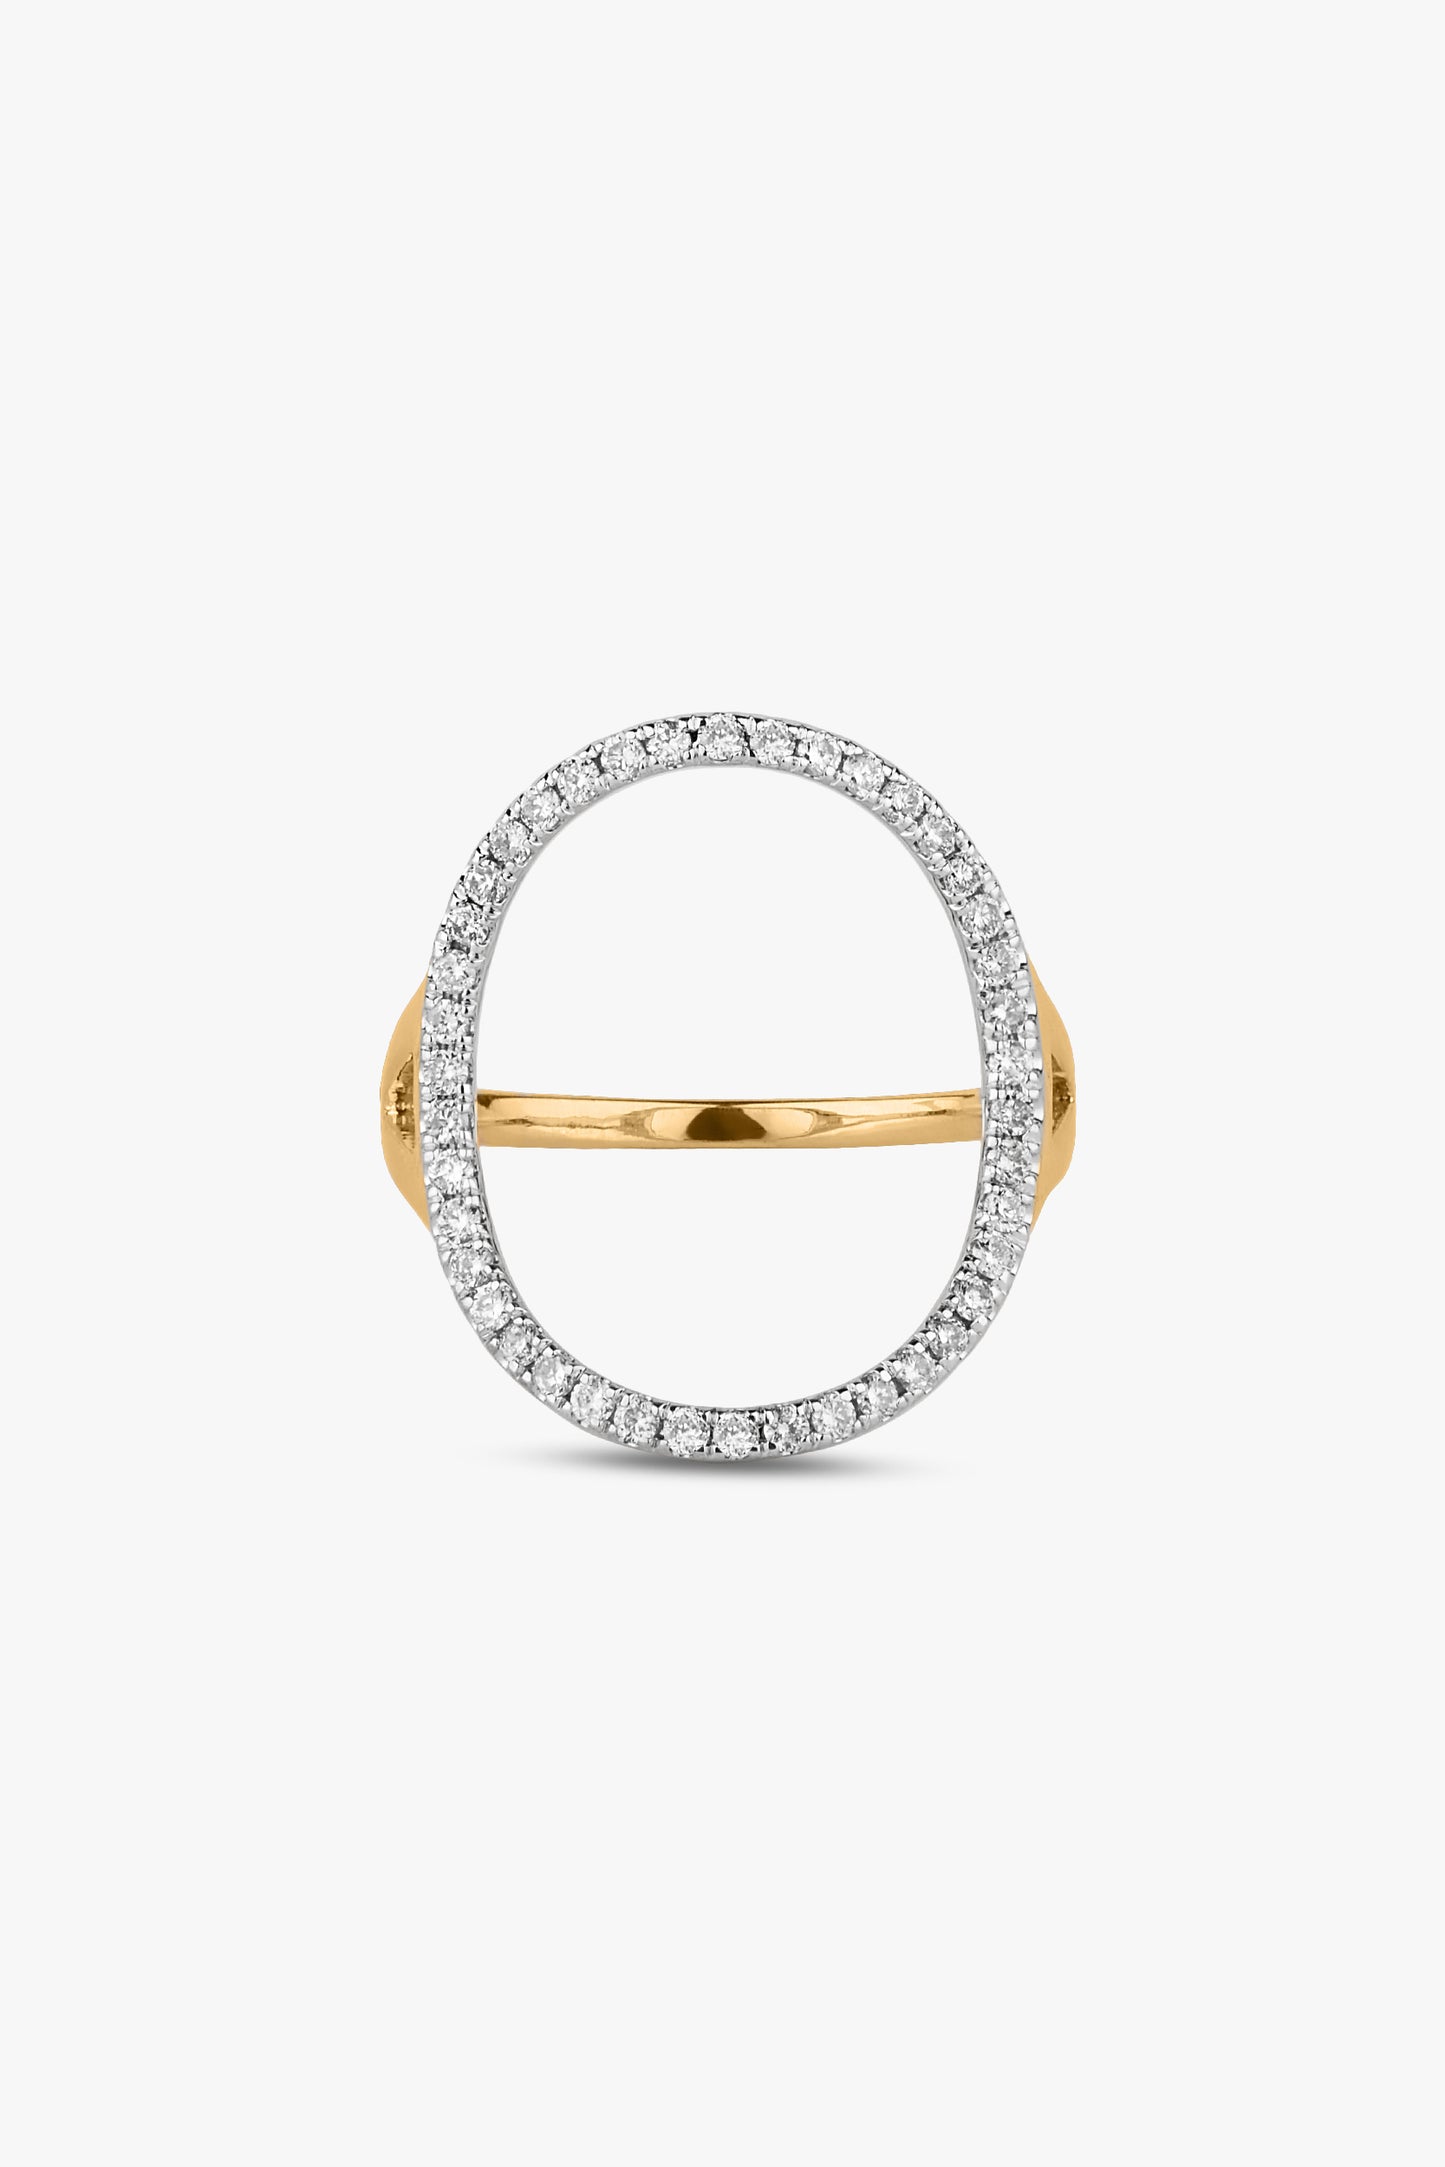 The Oval Ring